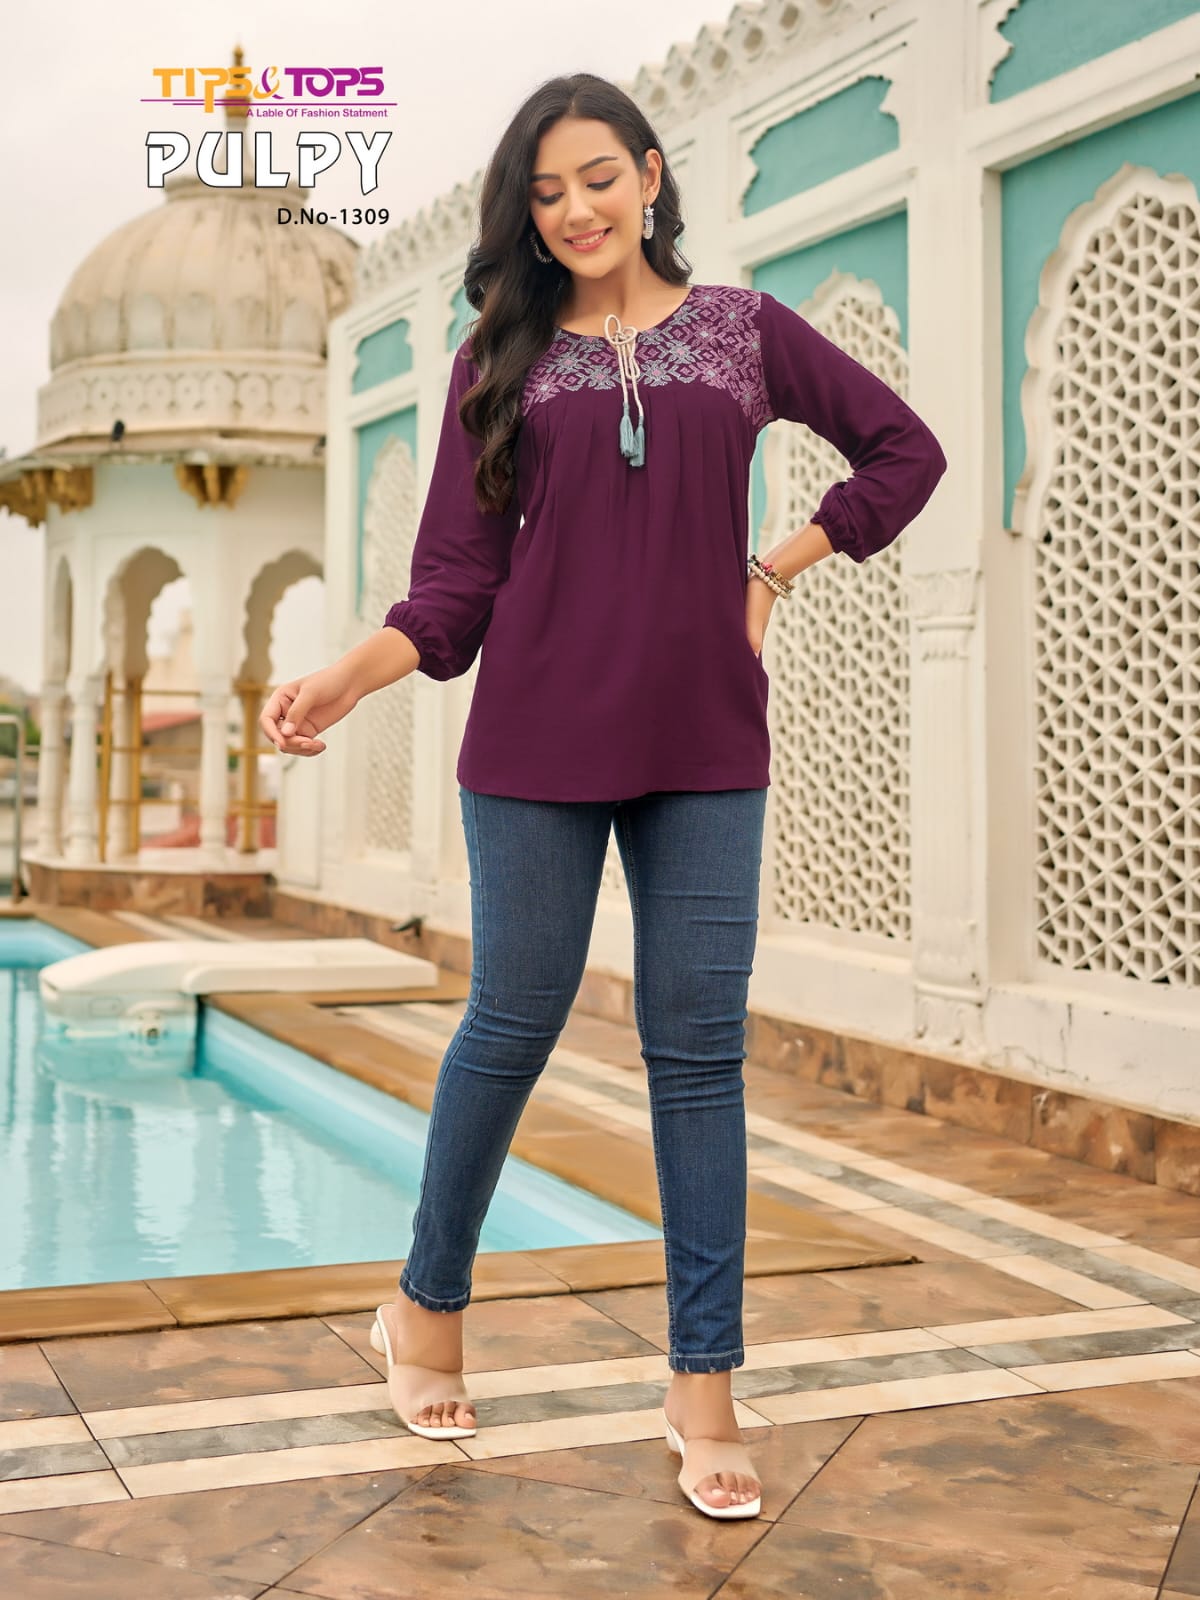 Tips Tops Pulpy Vol 13 Ladies Tops Catalog collection 6